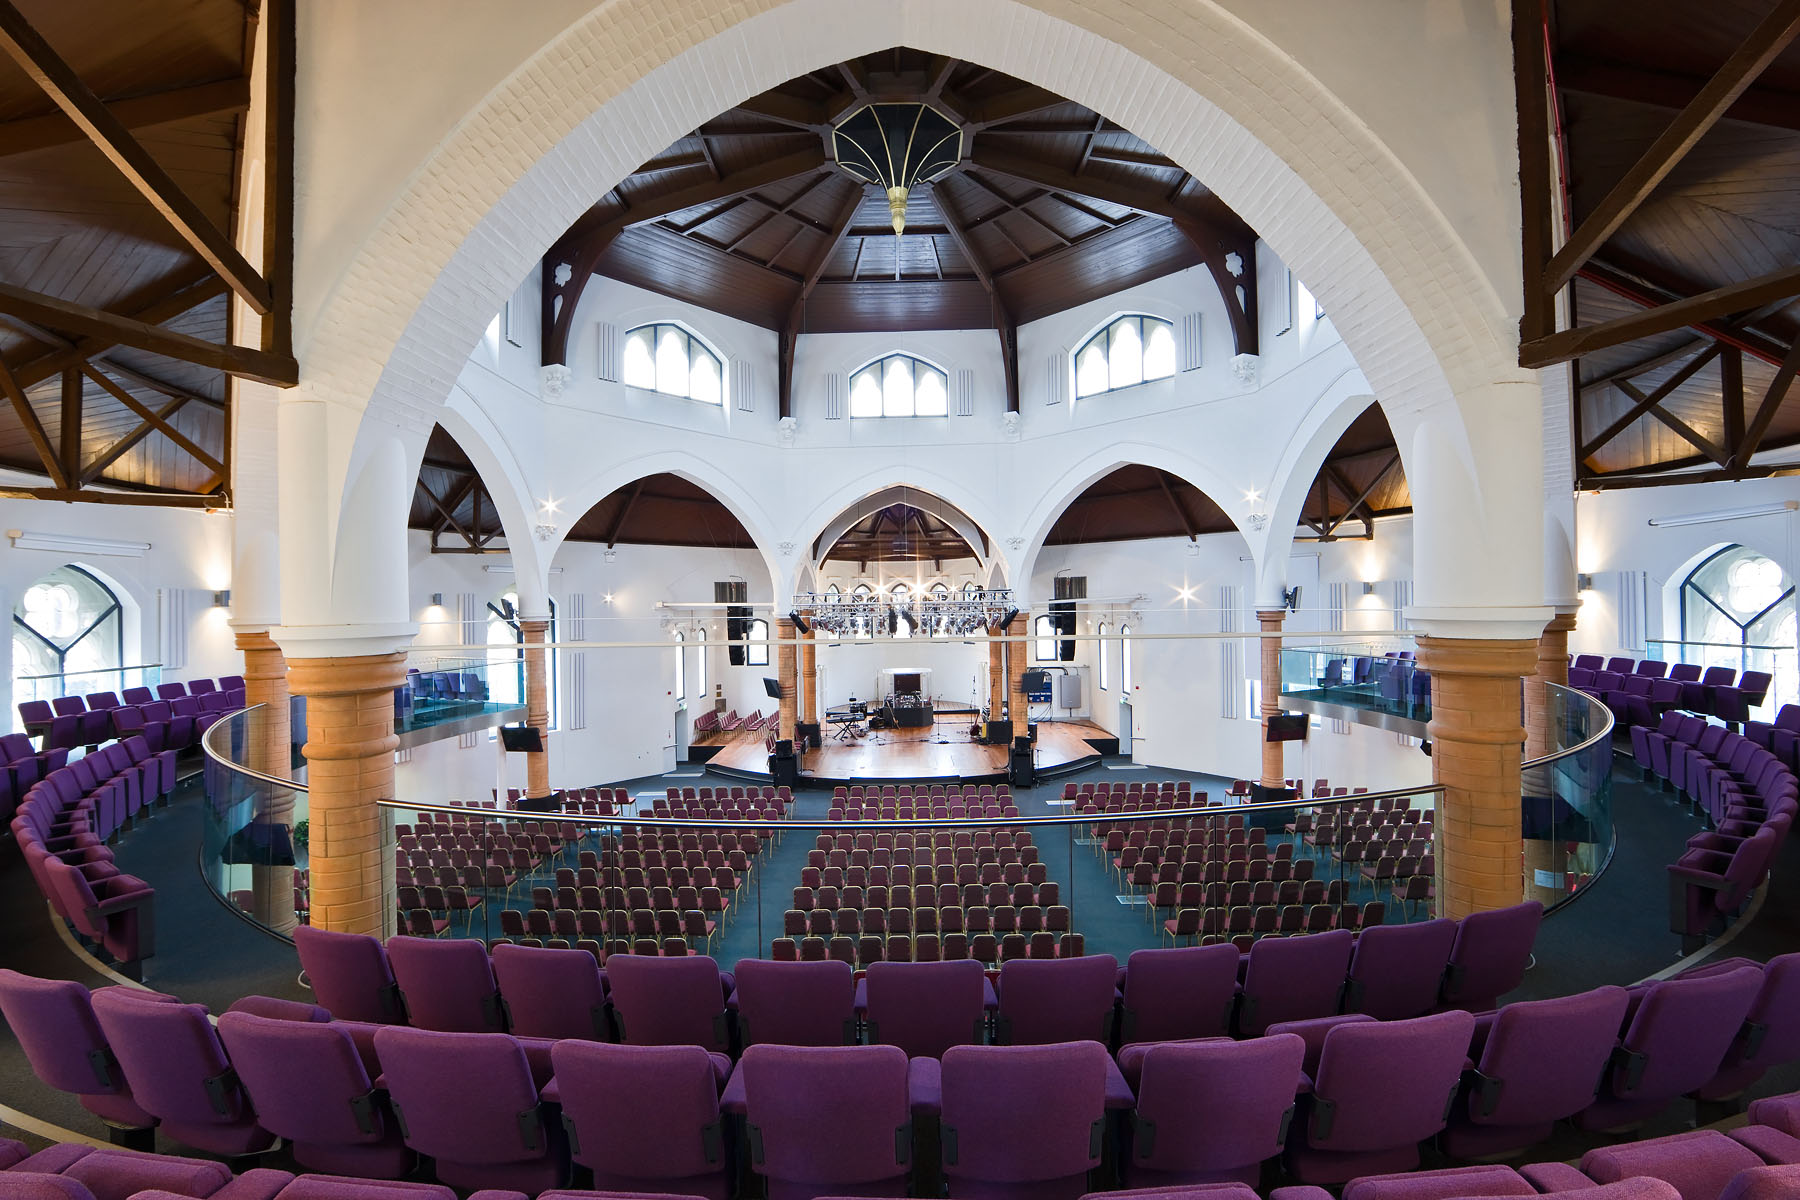 Reconversion of mixed use venue back into church with contemporary extension and linksClient: Paul Davis & Partners